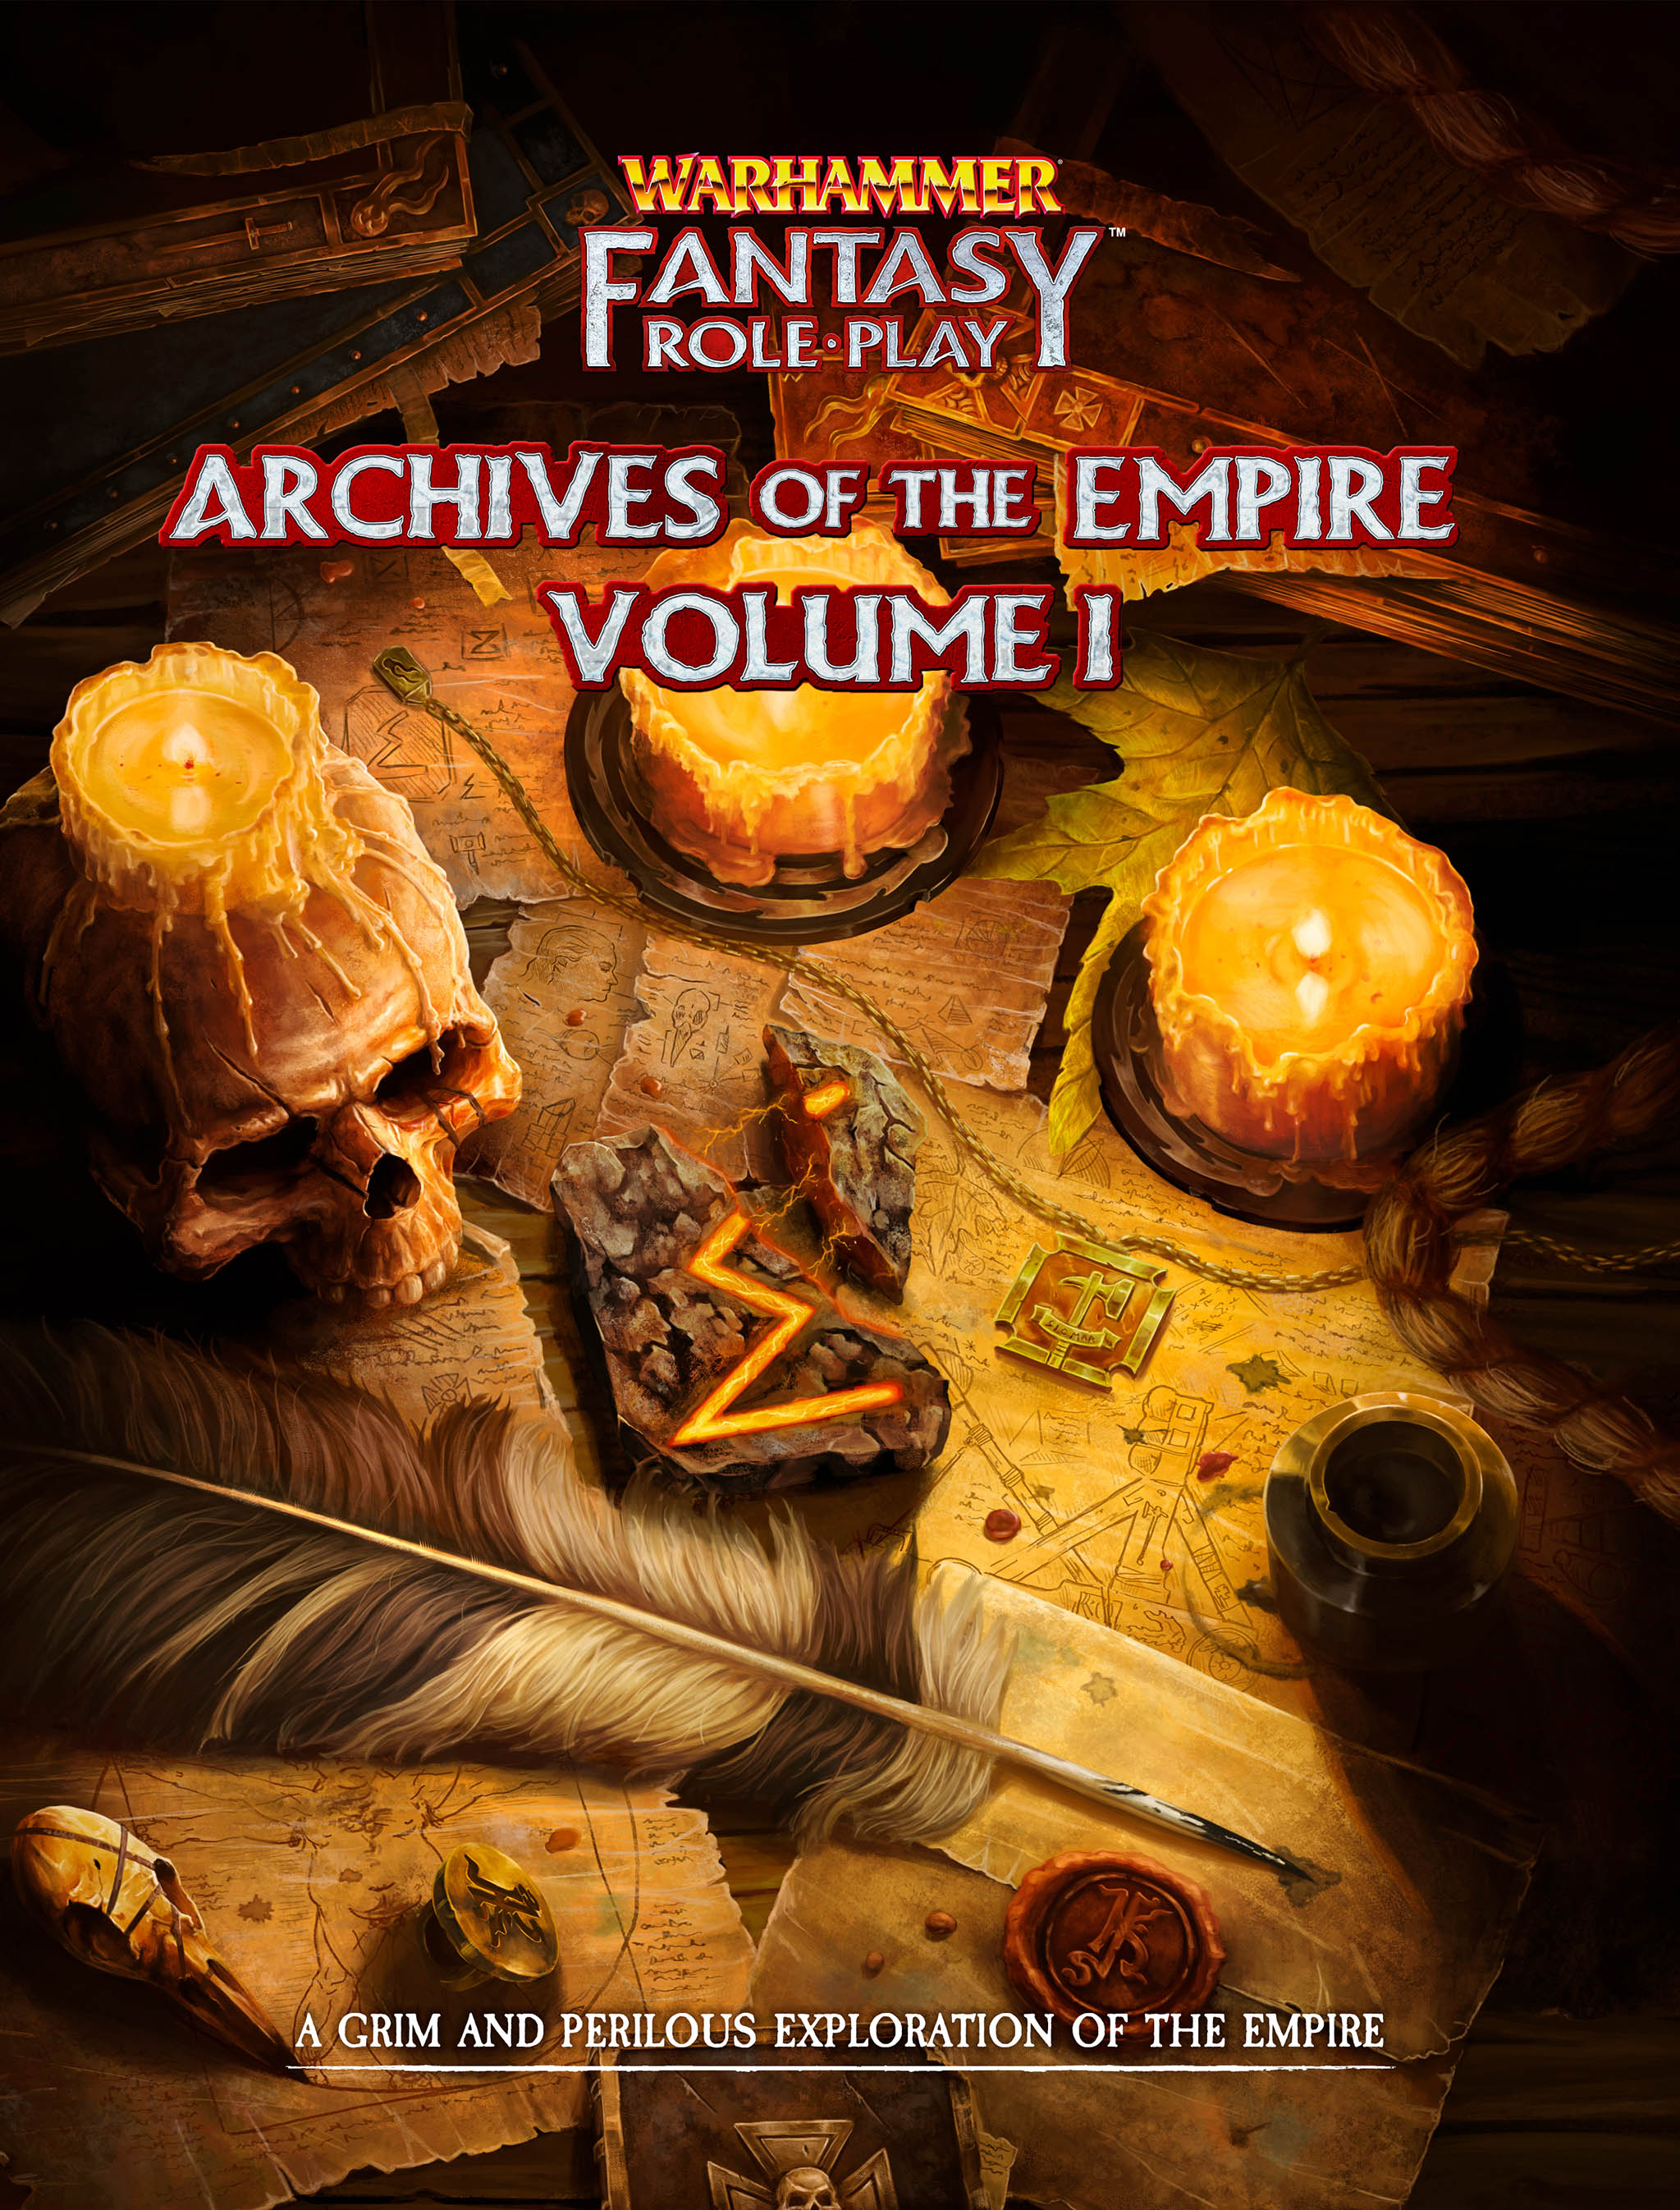 Warhammer Fantasy Roleplay (4th Ed): Archives of the Empire Volume 1 